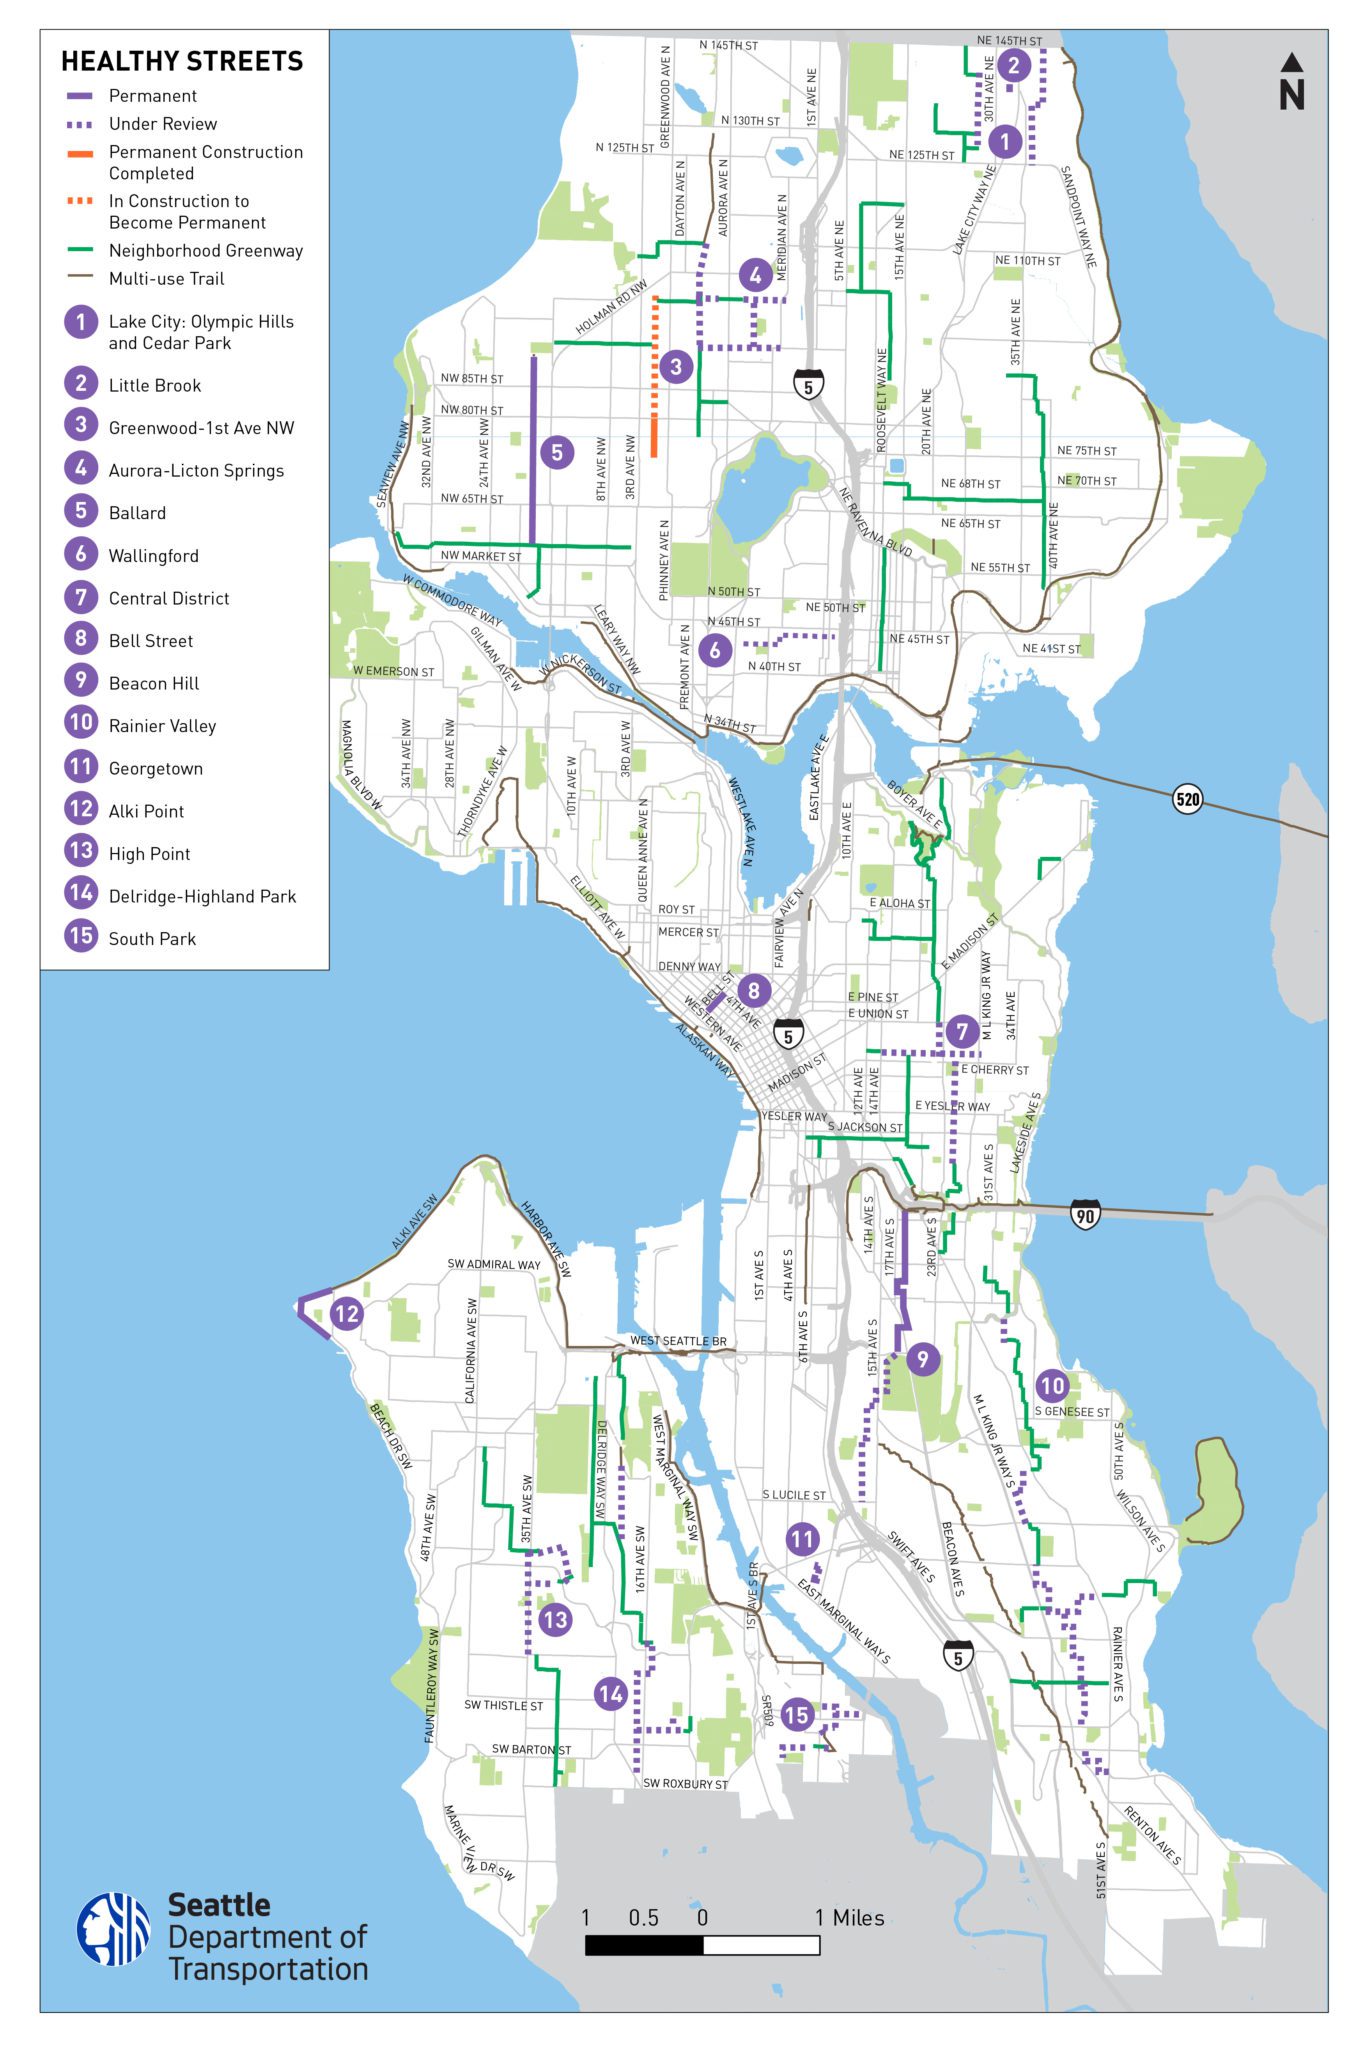 Map of planned permanent Healthy Streets moving forward. Permanent ones are shown in solid purple, under review in dashed purple, permanent construction completed in orange, in construction to become permanent in dashed orange, neighborhood greenway in green, and multi-use trail in brown. The map shows 15 locations in purple dots, throughout north, central, and south Seattle.